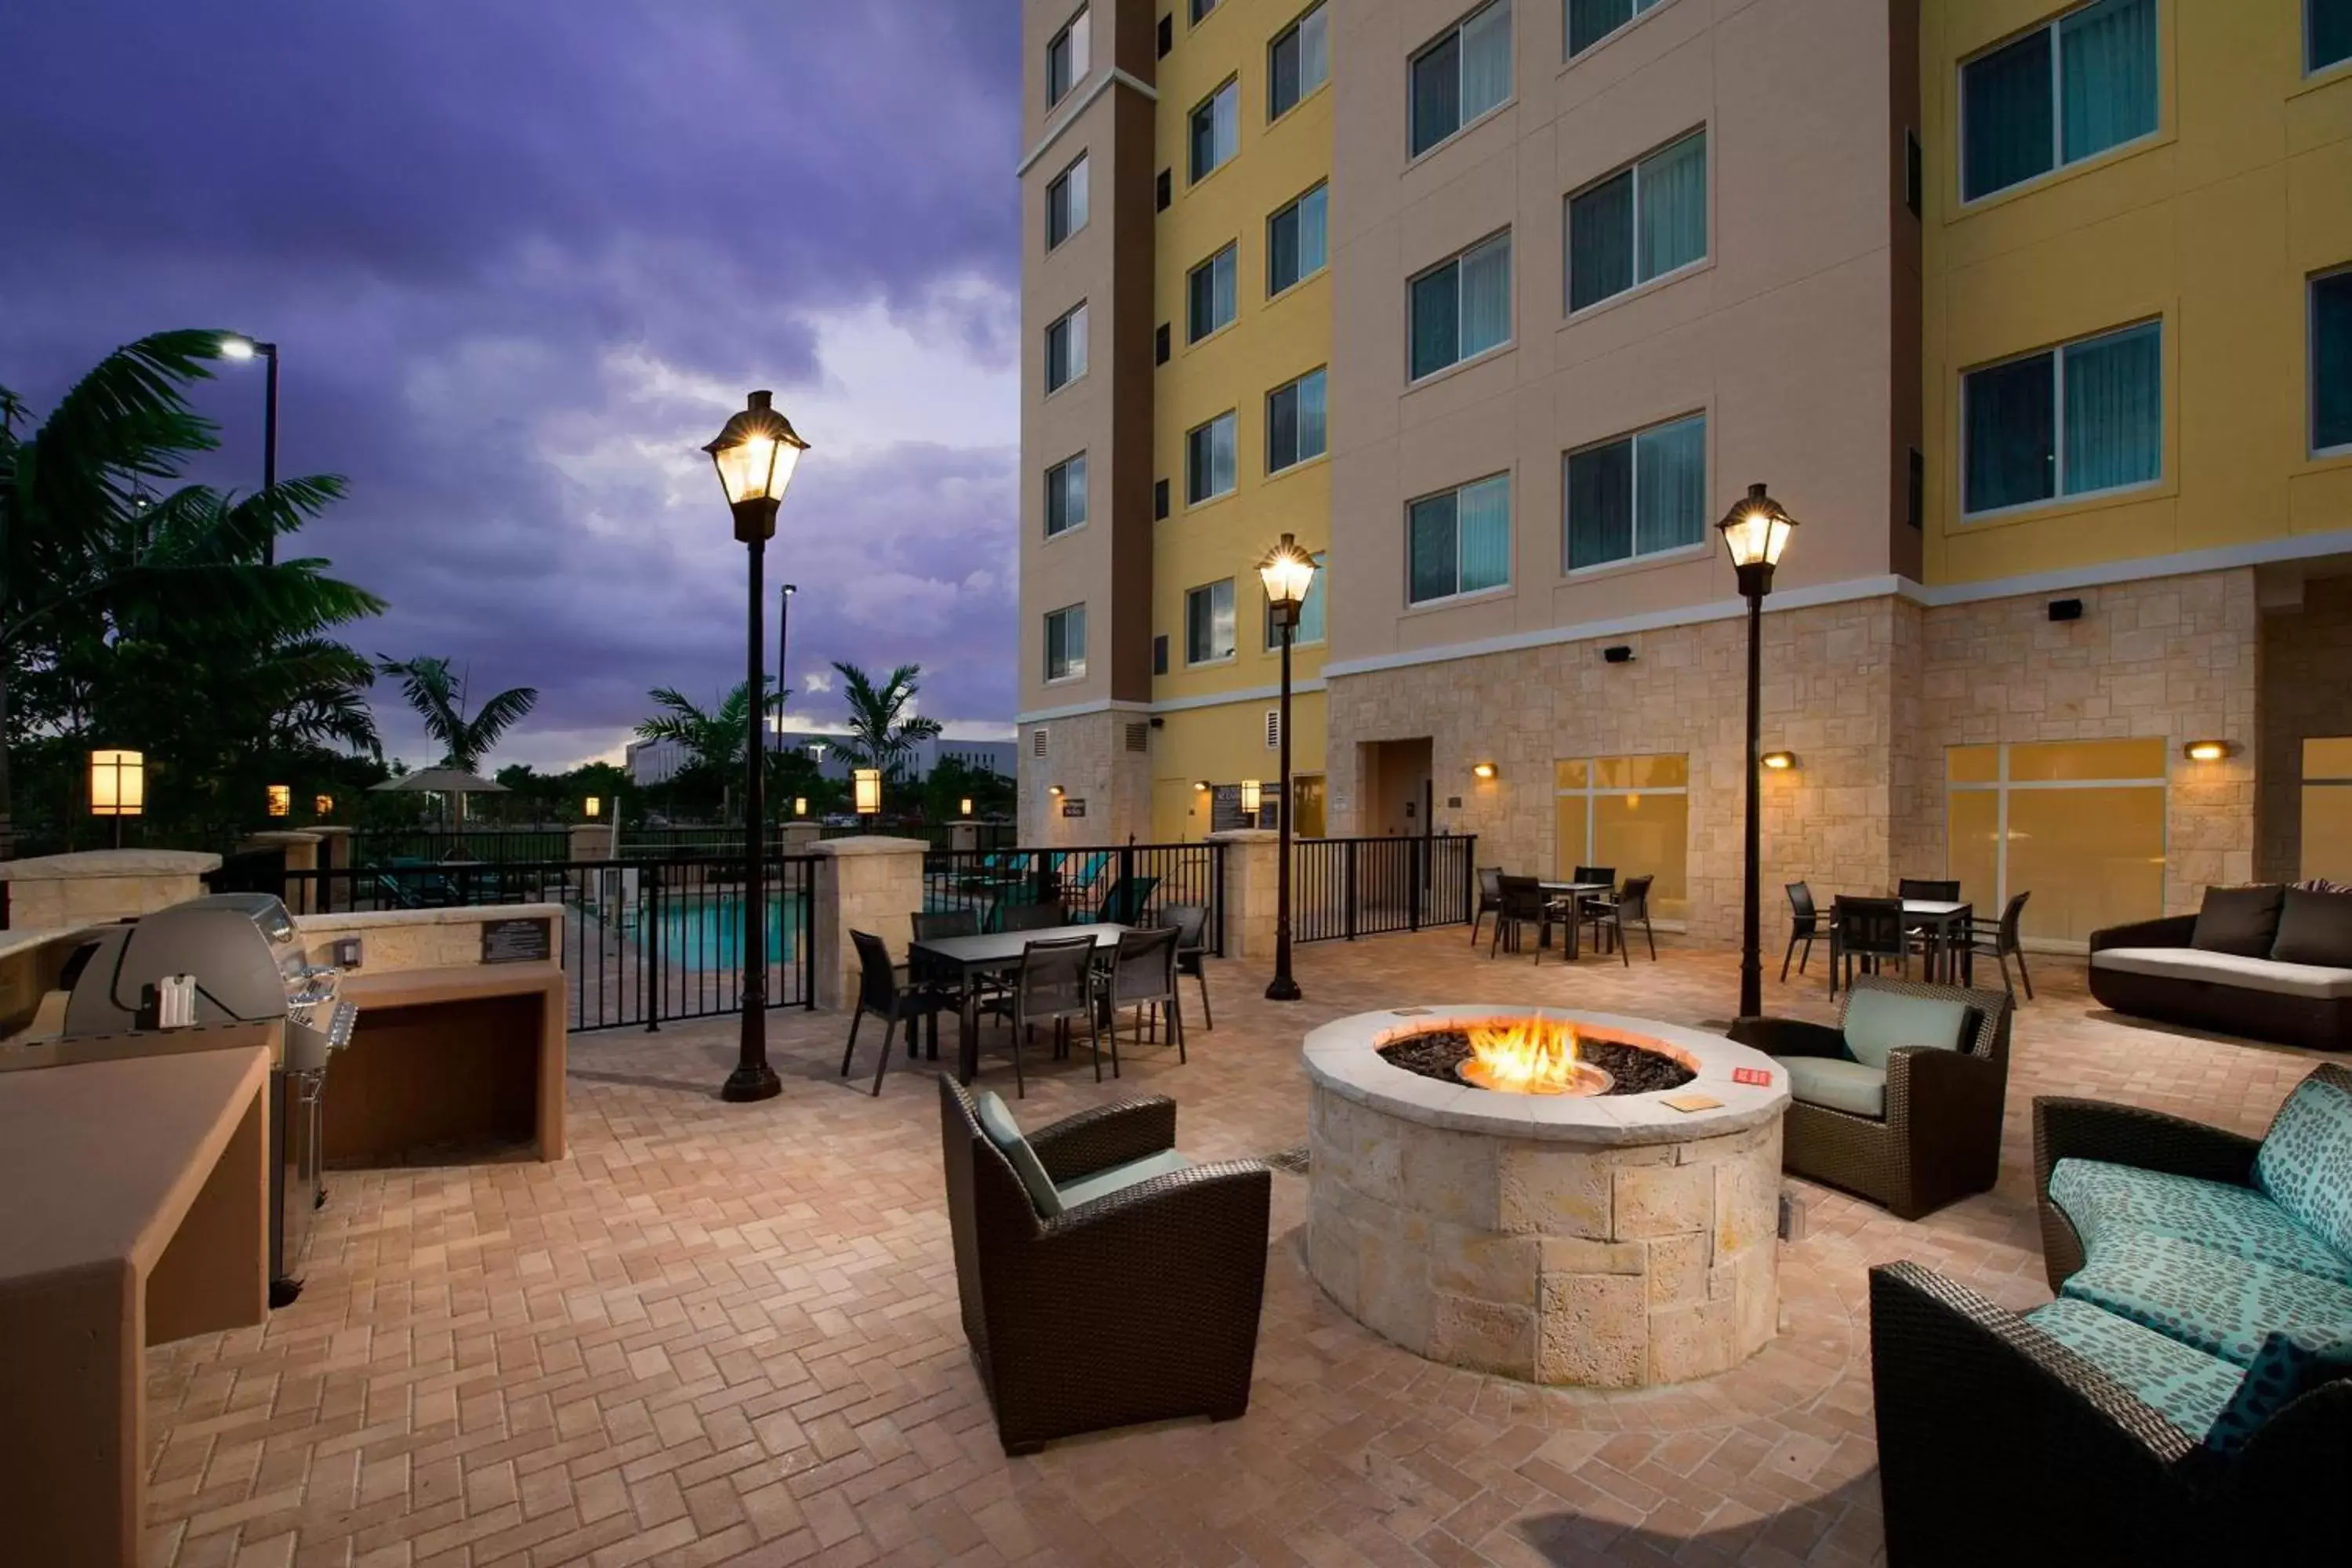 Property building in Residence Inn by Marriott Miami Airport West/Doral